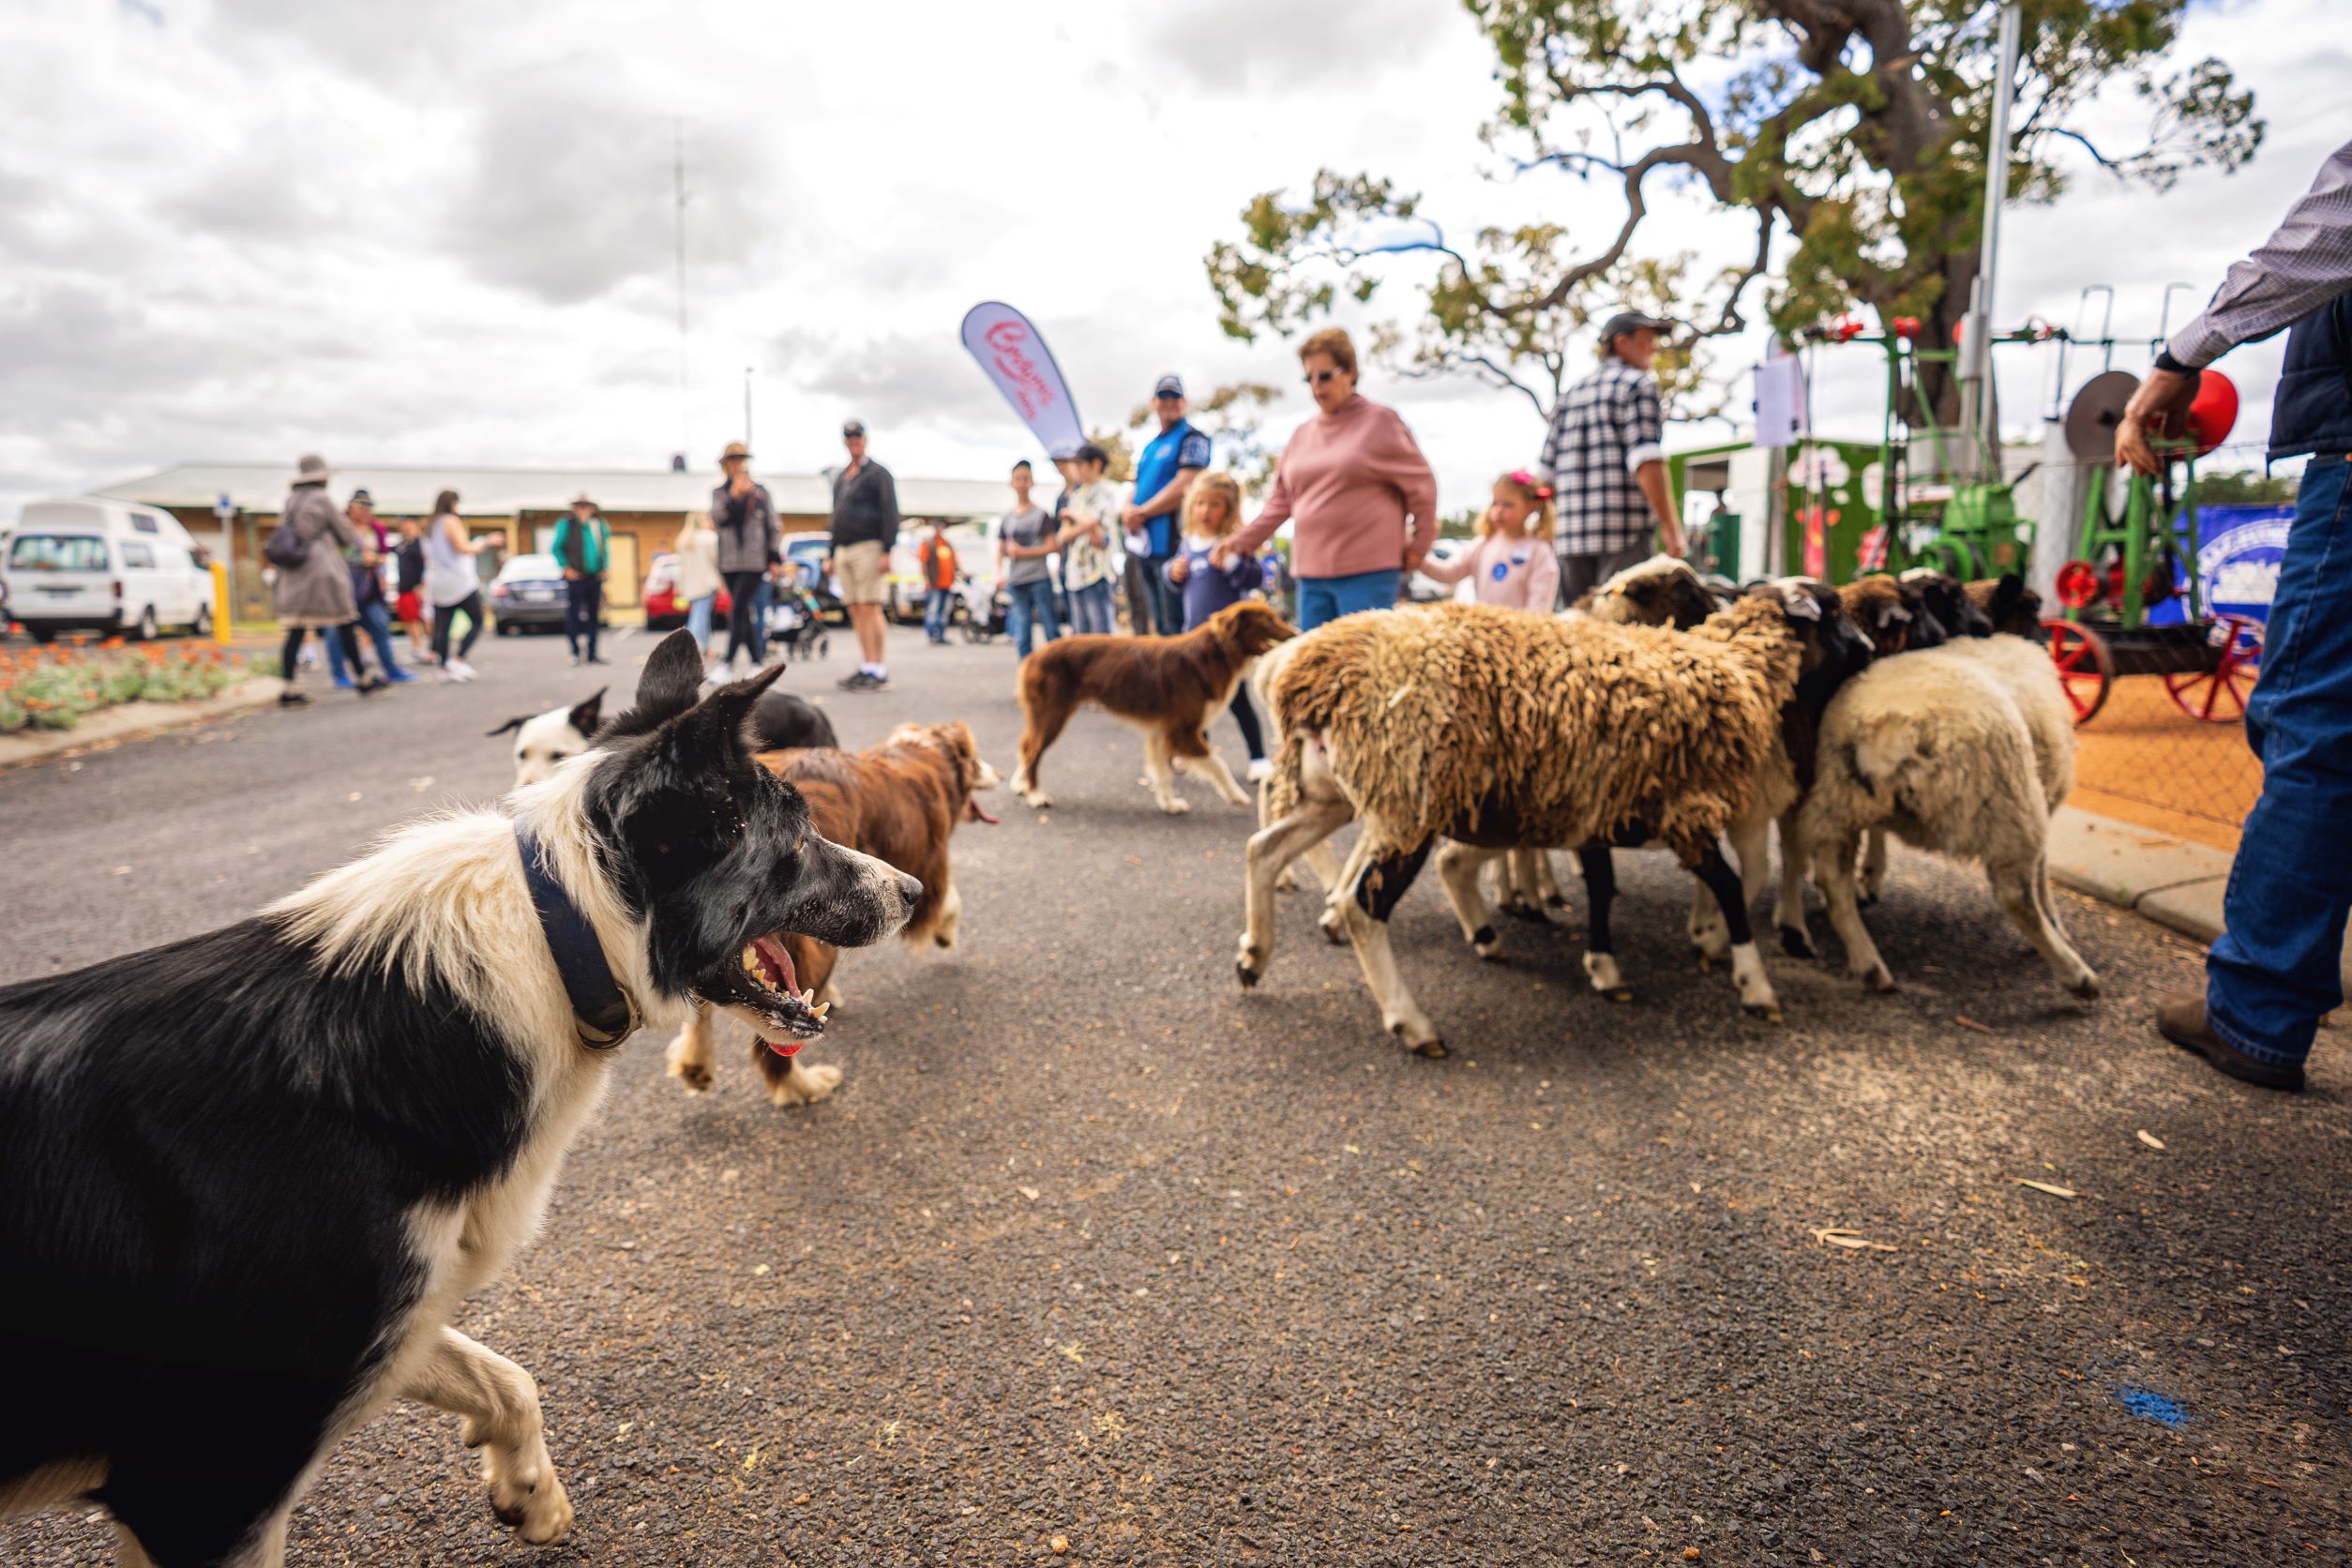 Herding sheep in crowd Waroona Show D Lacey